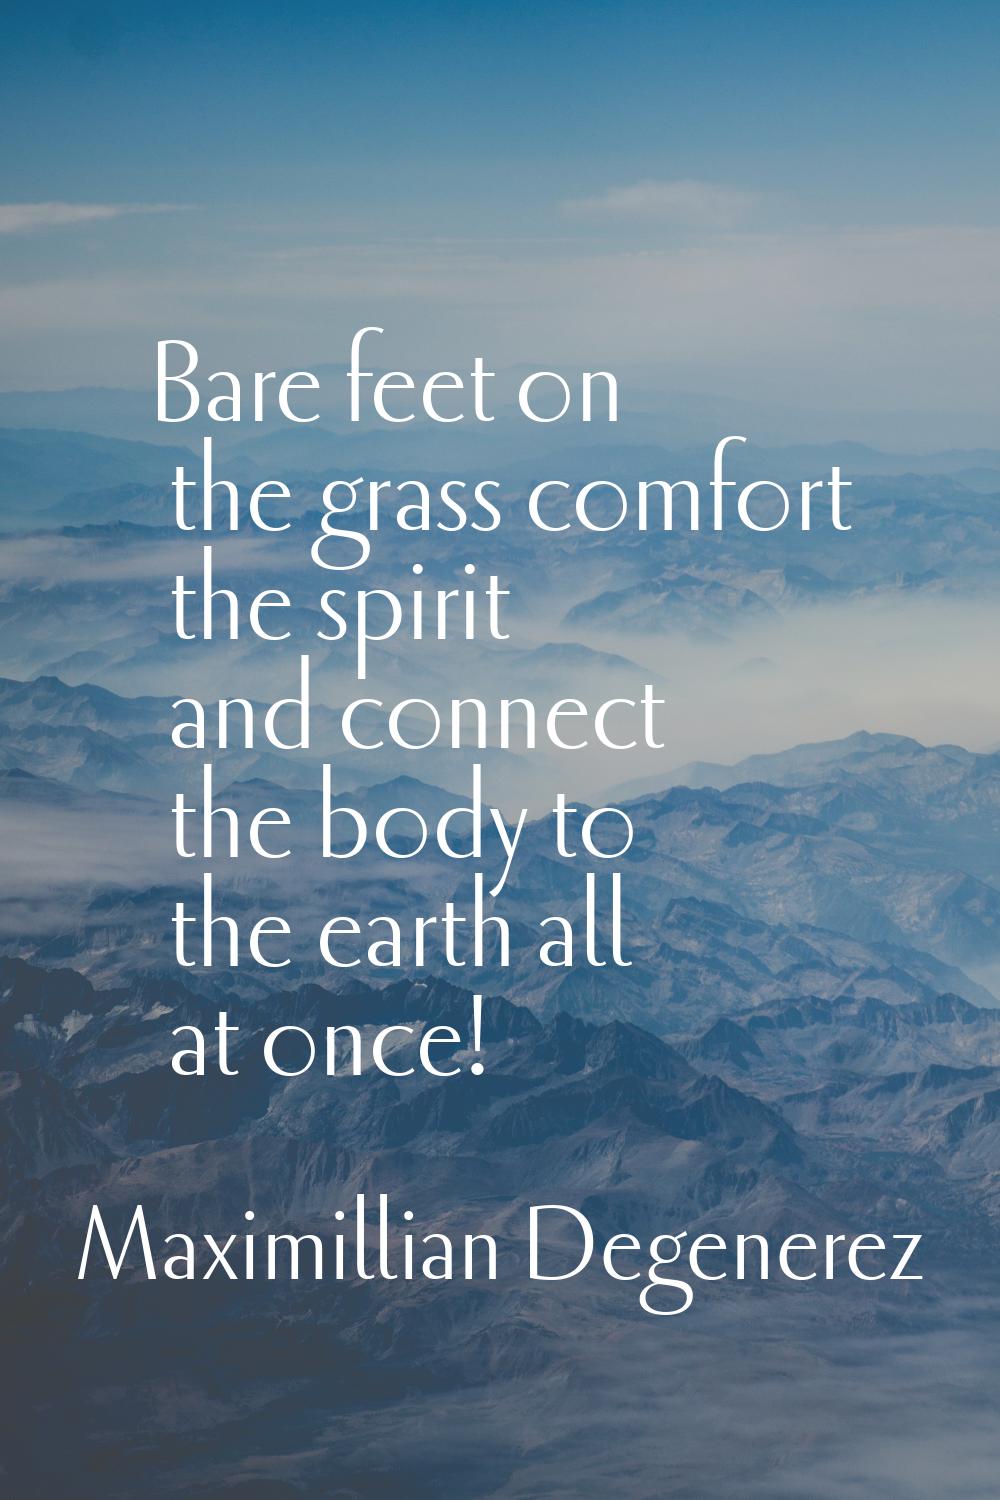 Bare feet on the grass comfort the spirit and connect the body to the earth all at once!